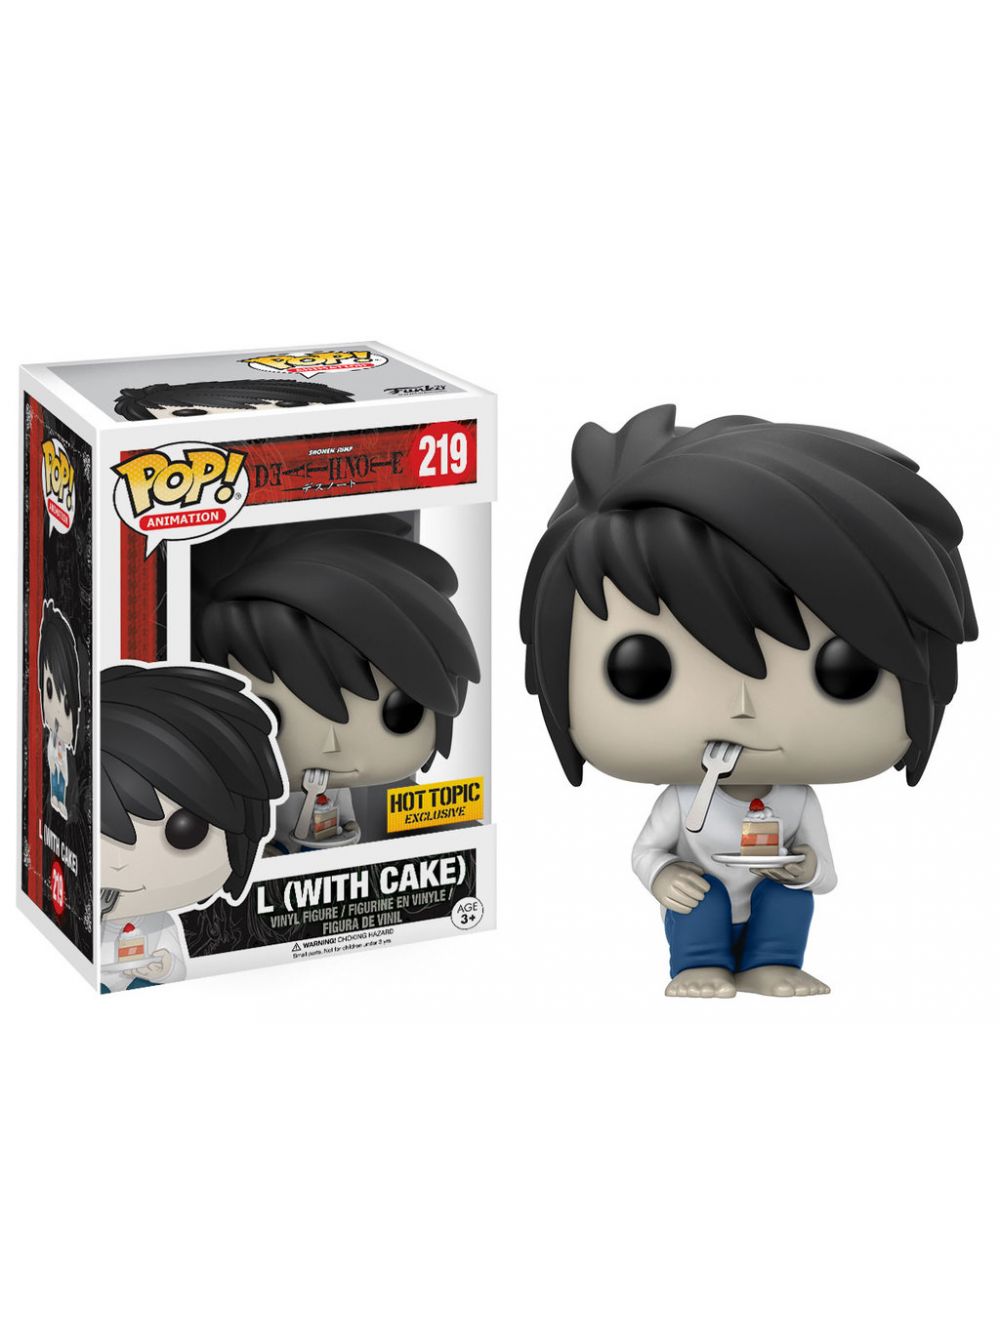 Animation Death Note L with Cake Funko Pop Vinyl